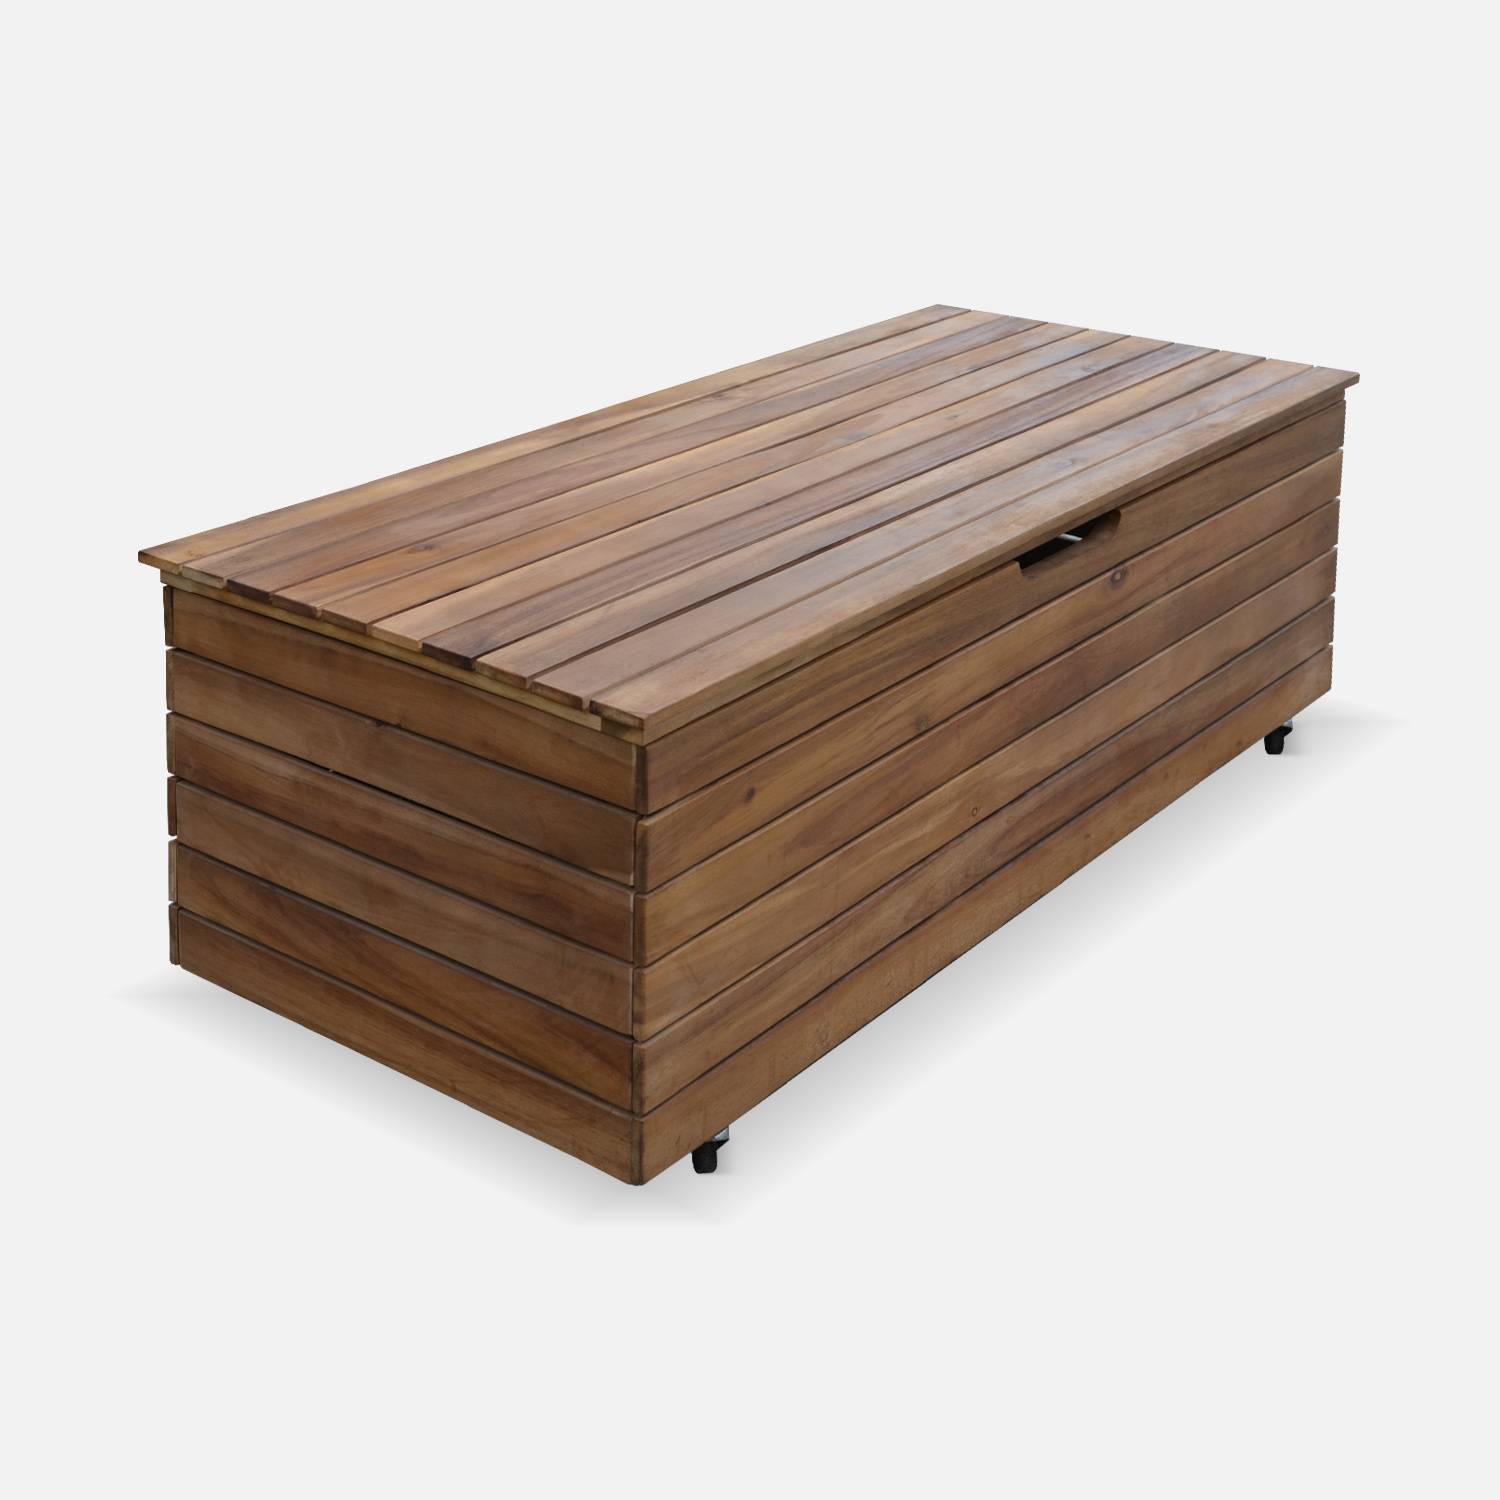 Garden storage box in wood - Saragosse - 110L, cushion storage, 107x48.5cm with hydraulic lift opening and casters,sweeek,Photo3